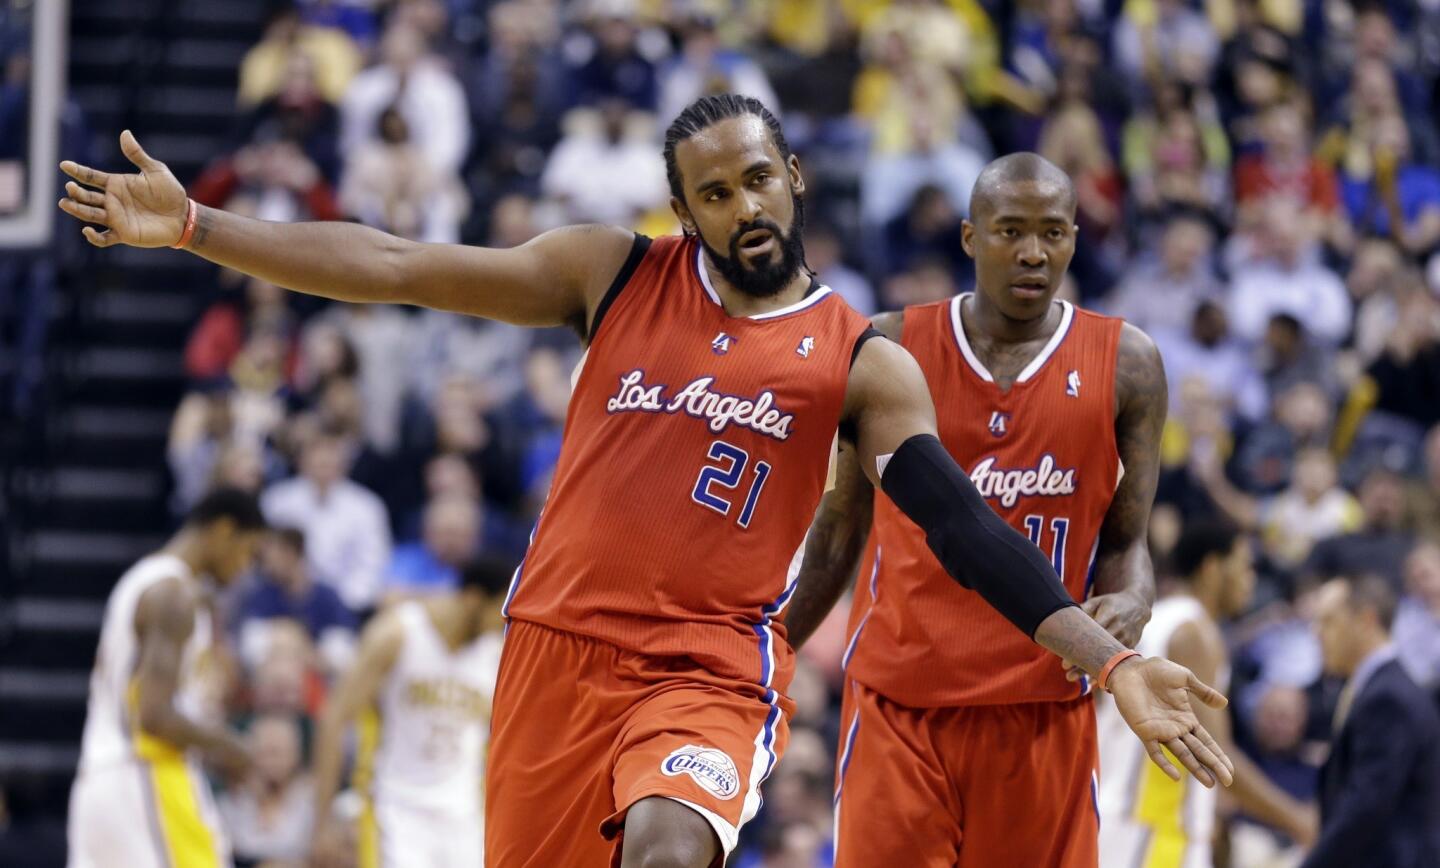 Clippers center Ronny Turiaf celebrates in the second half Thursday night in Indianapolis.